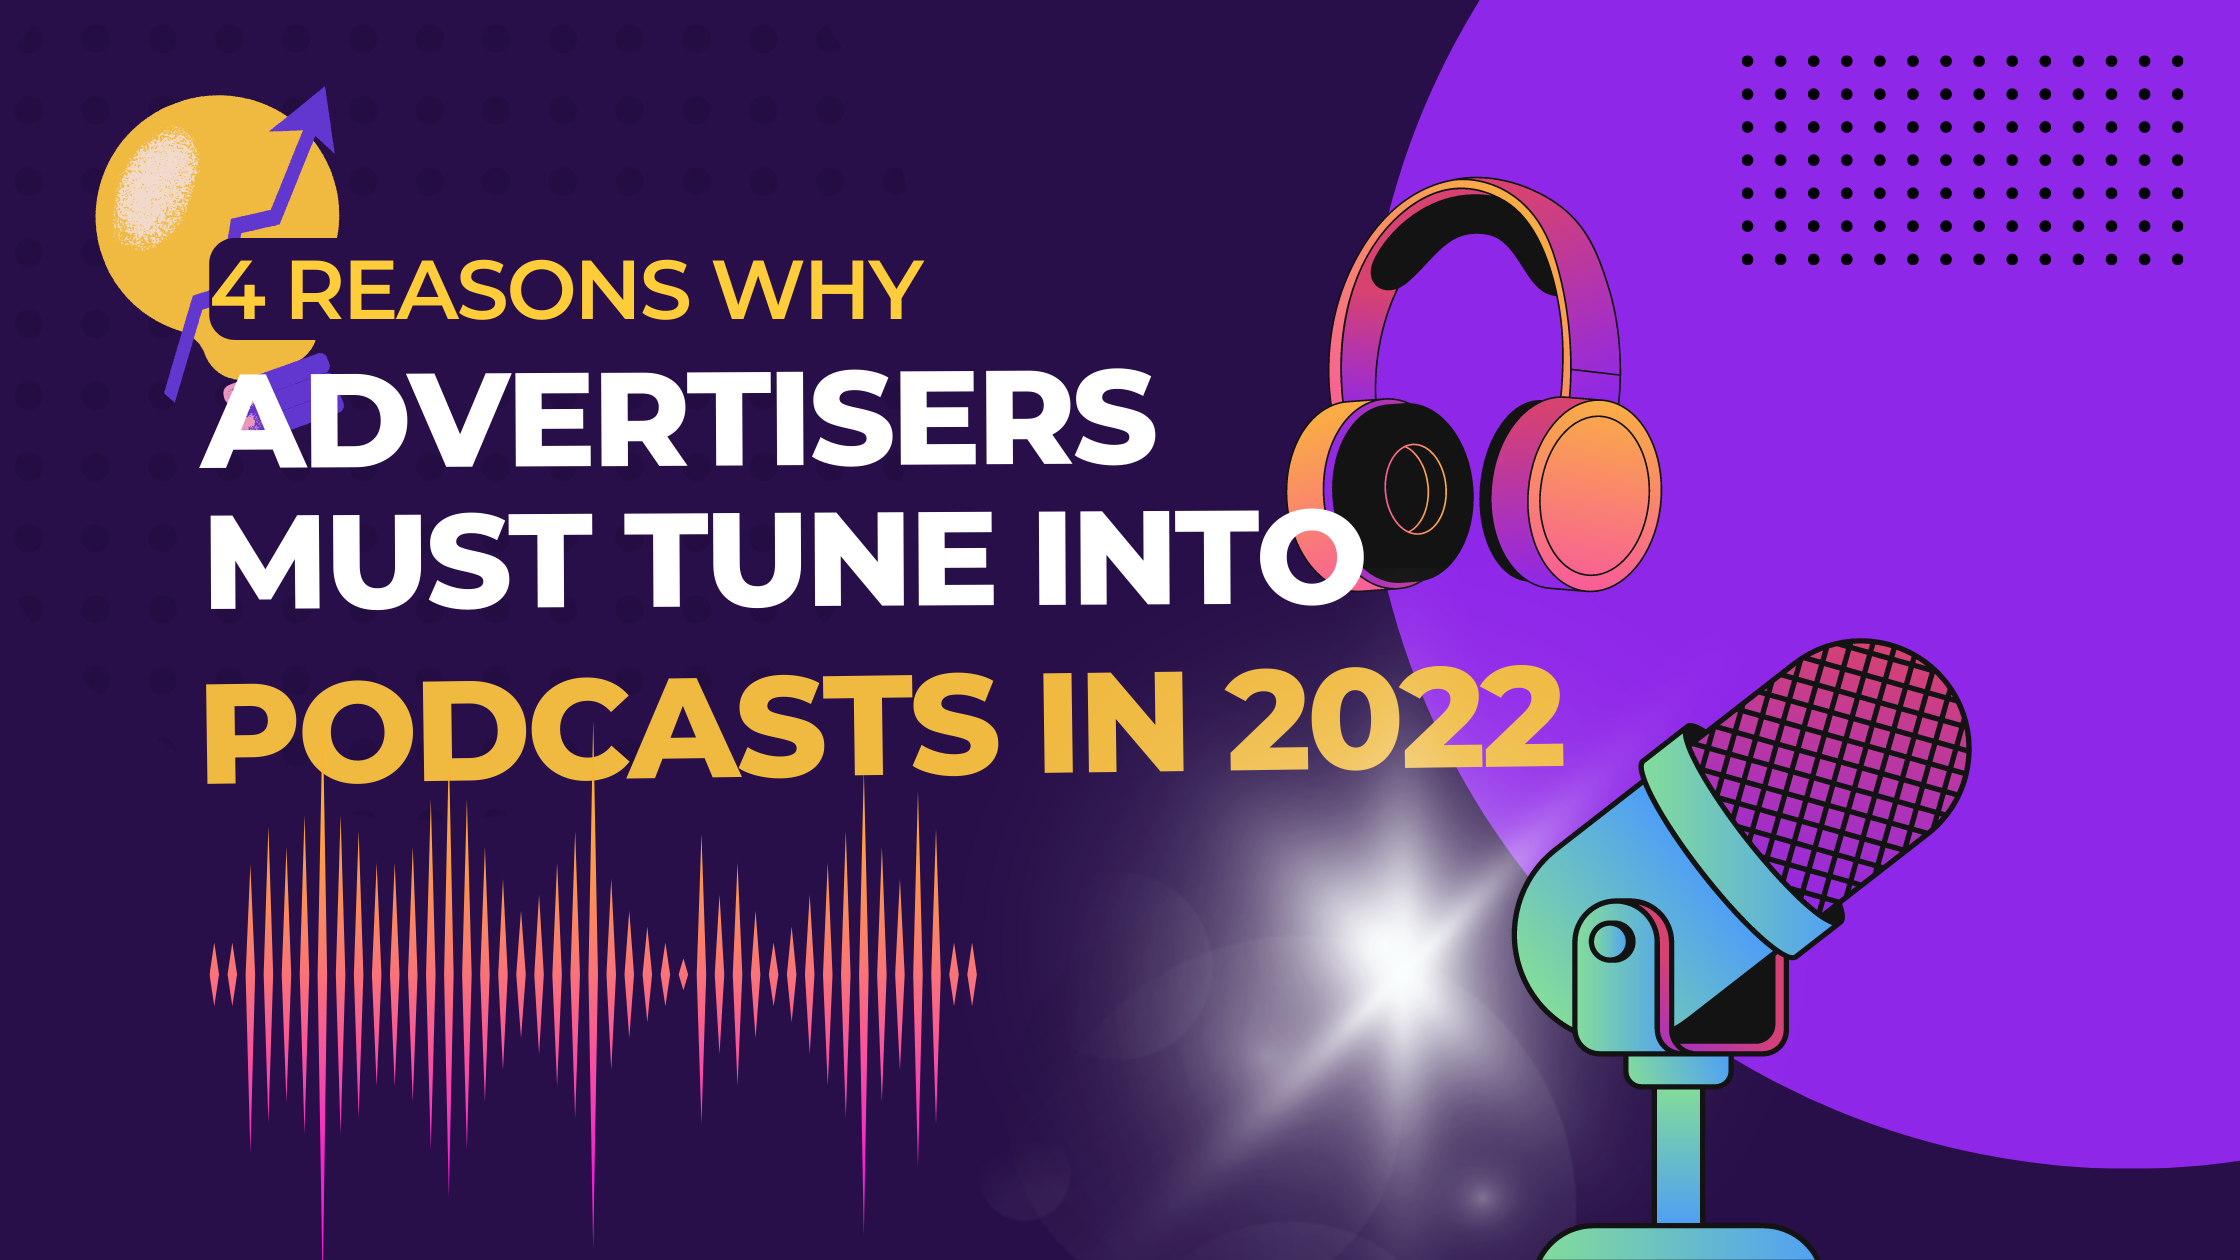 Reasons to advertise on podcasts